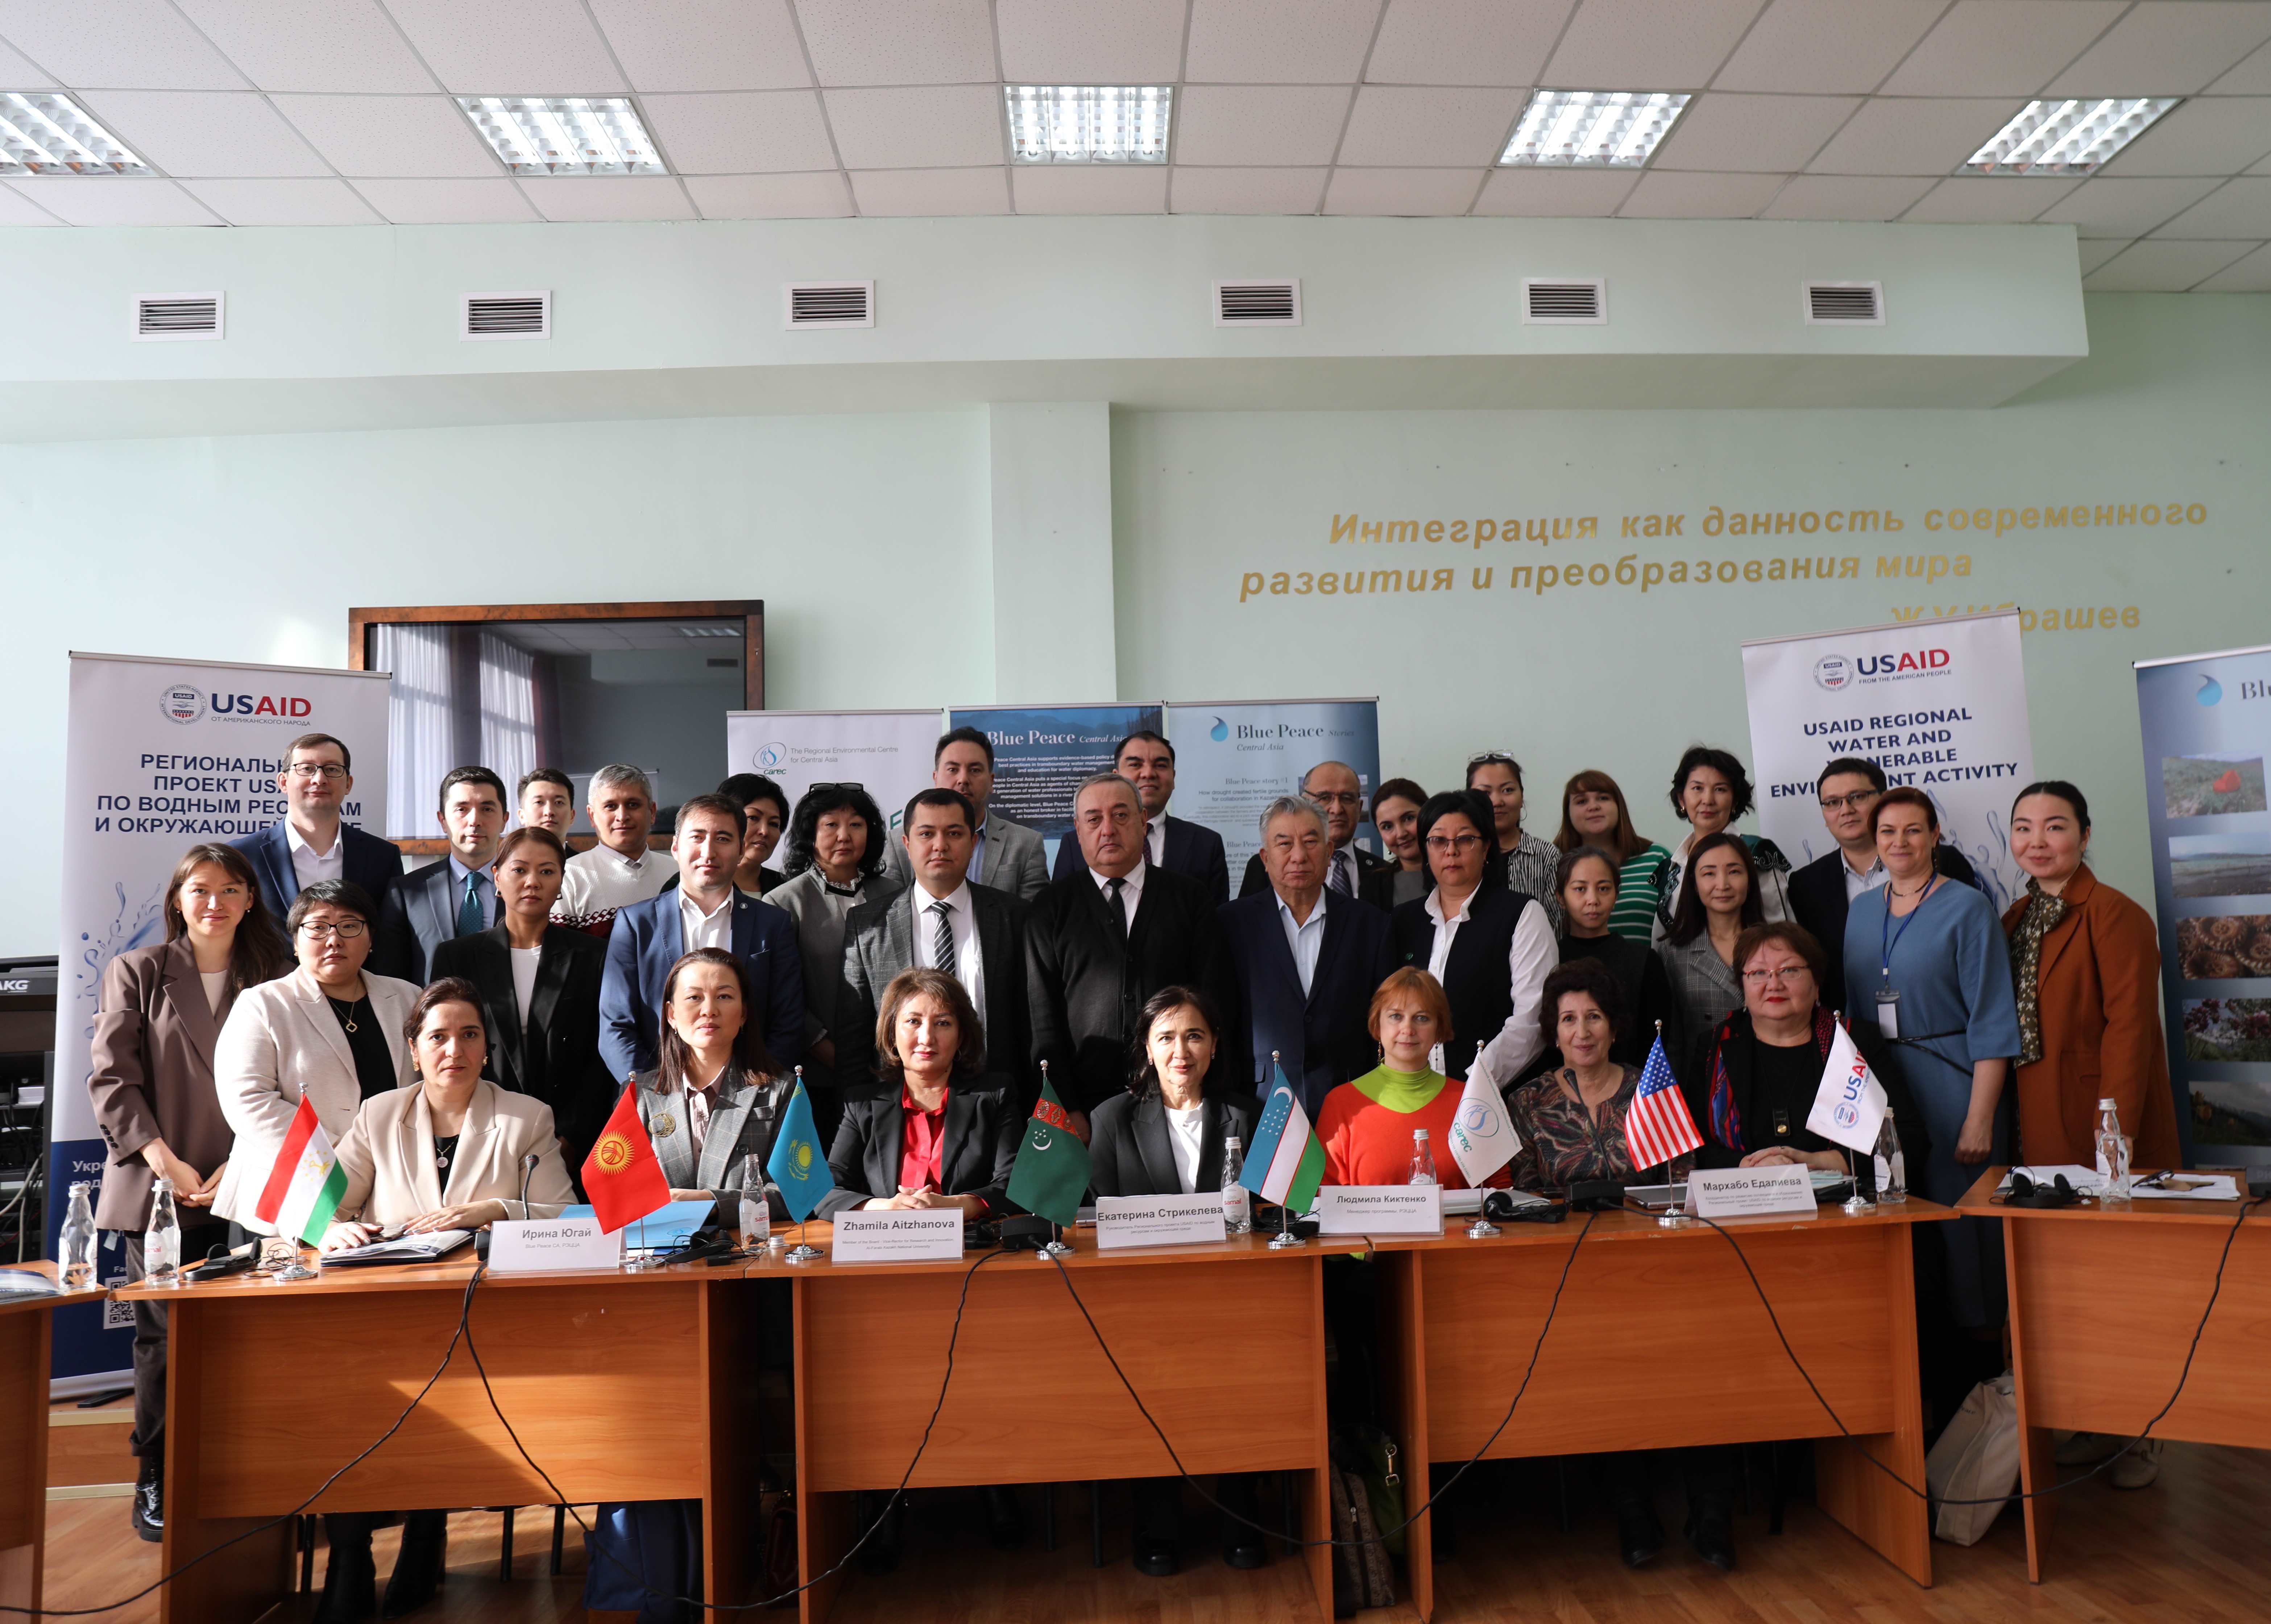 Central Asian Network of Academic Societies: role in strengthening regional cooperation